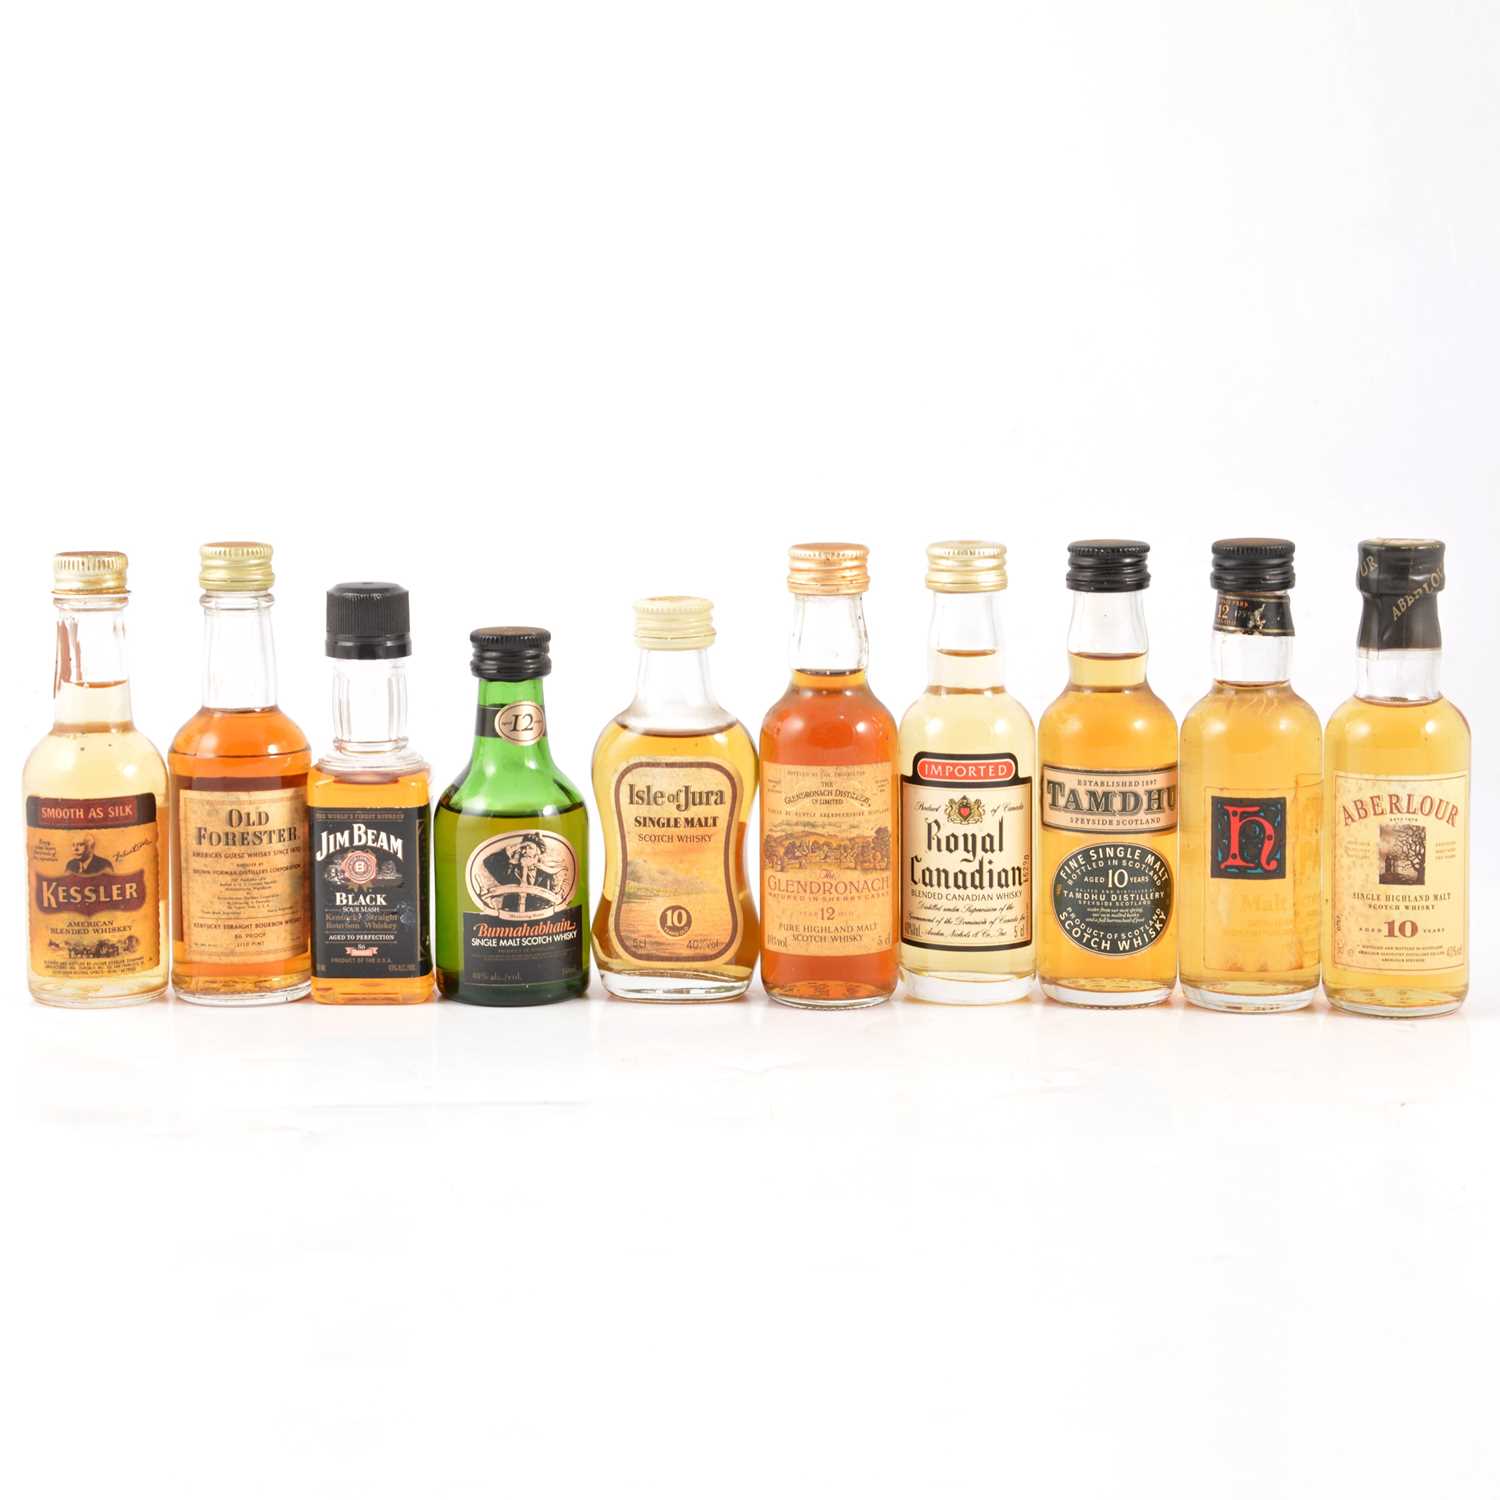 Lot 205 - Collection of assorted miniatures, mostly whisky, some single malts, blends, and American